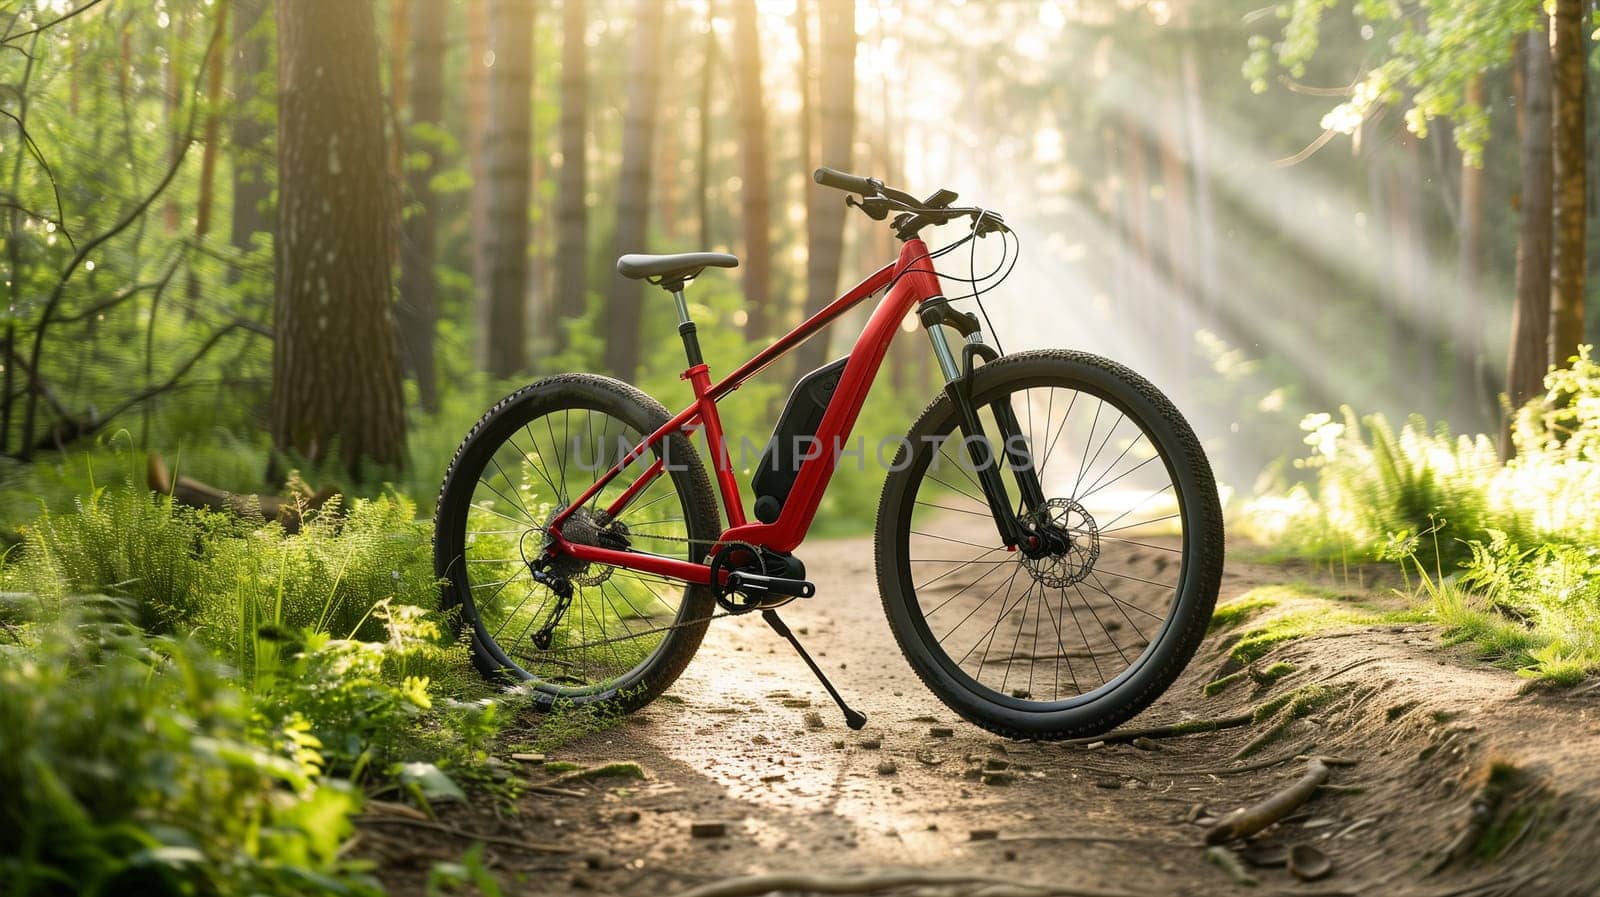 Red Mountain Bike Parked in Wooded Area by Sd28DimoN_1976